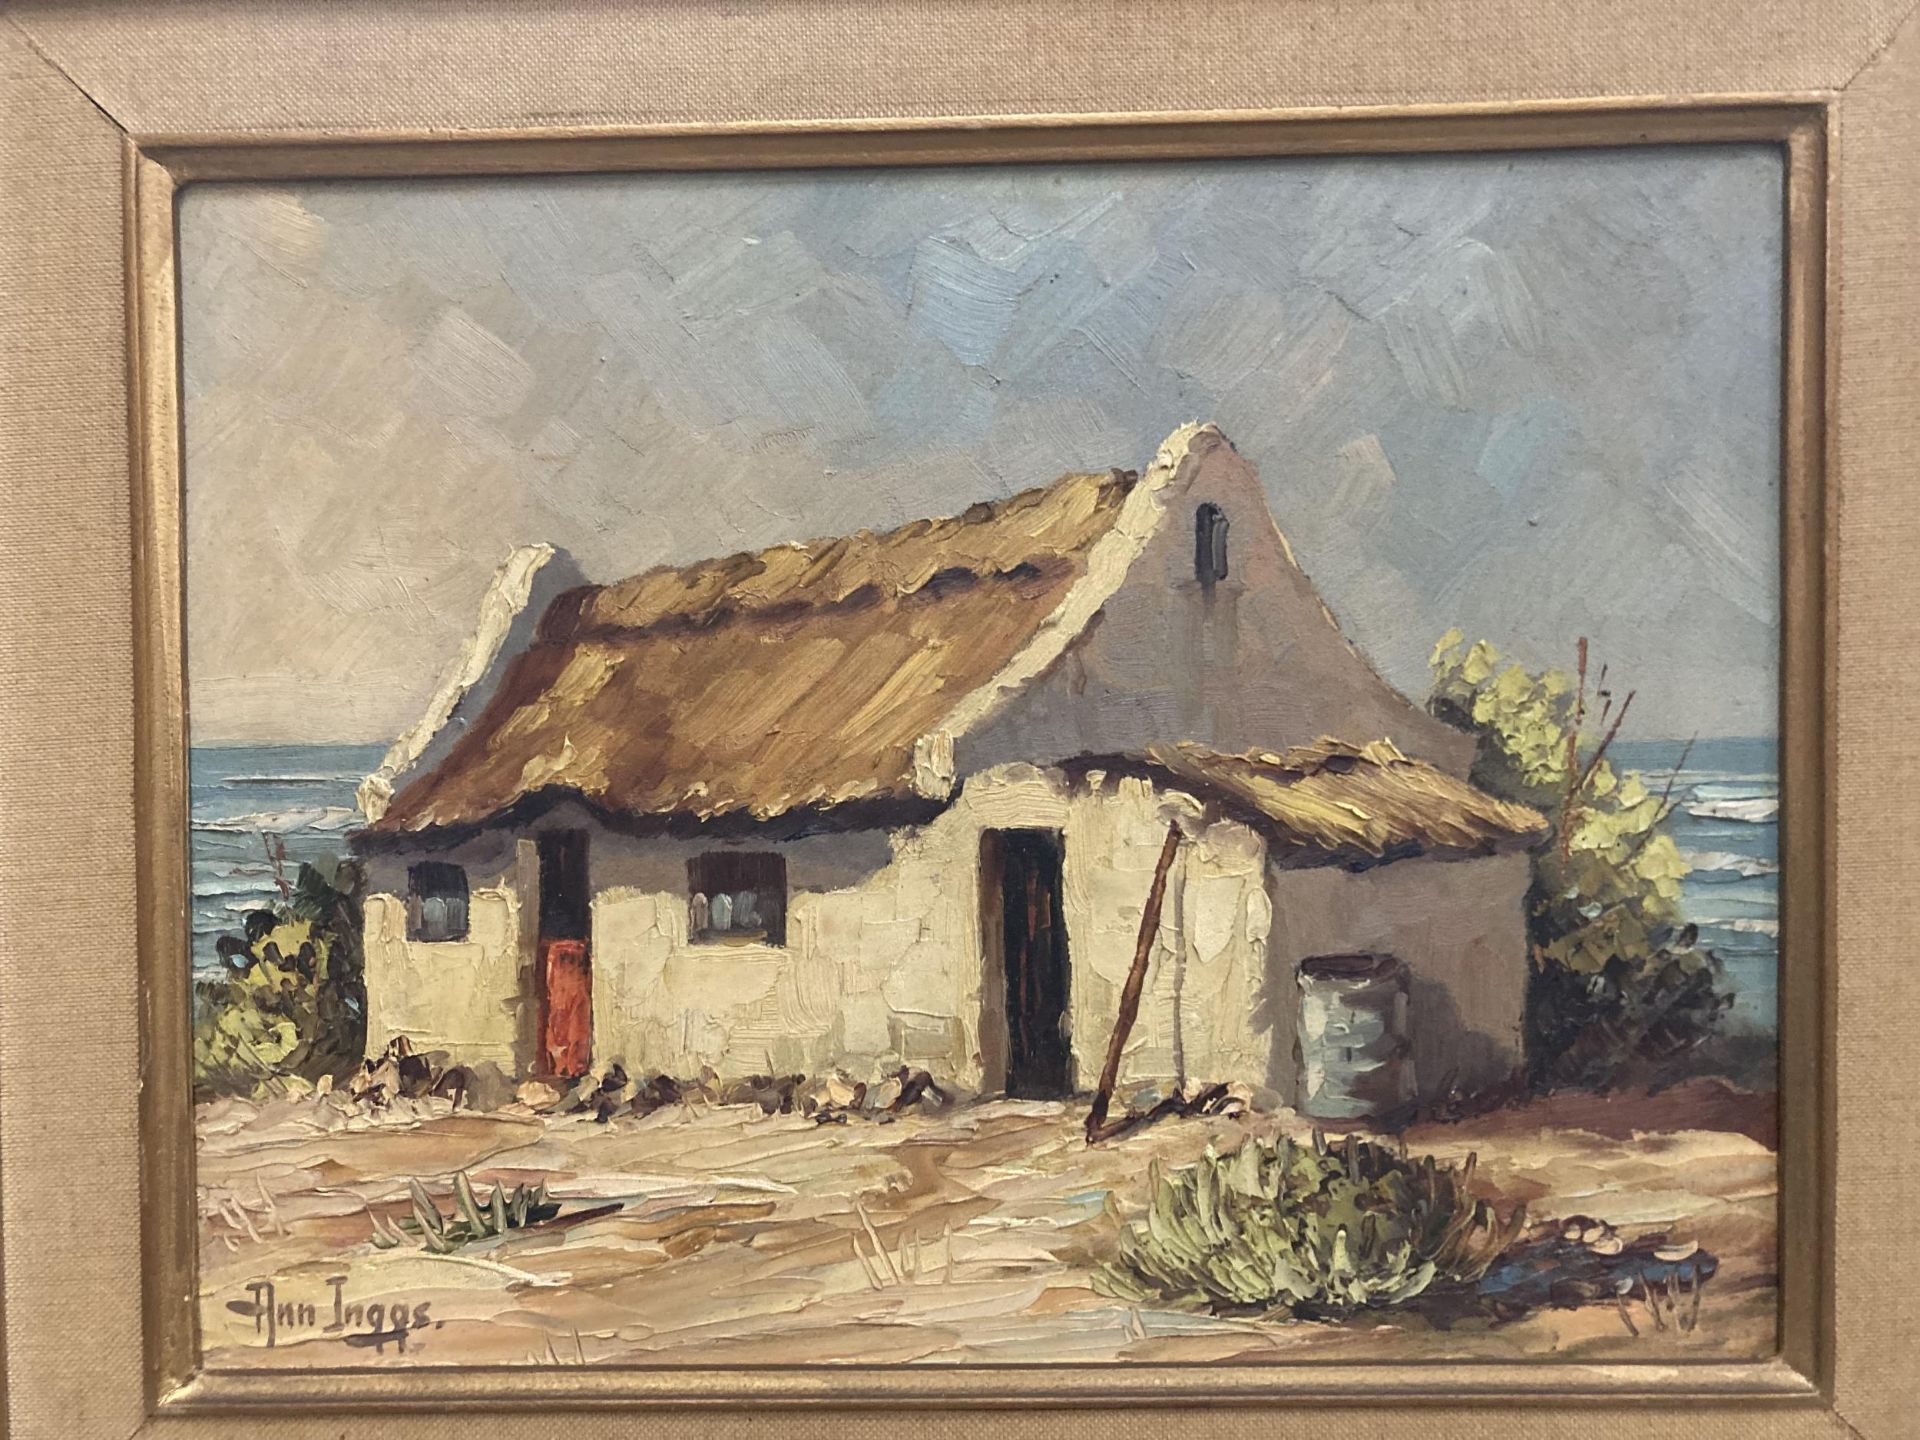 AN ANN INGGS 1936 SOUTH AFRICA FRAMED OIL PAINTING OF A HOUSE BY THE SEA - Image 2 of 4